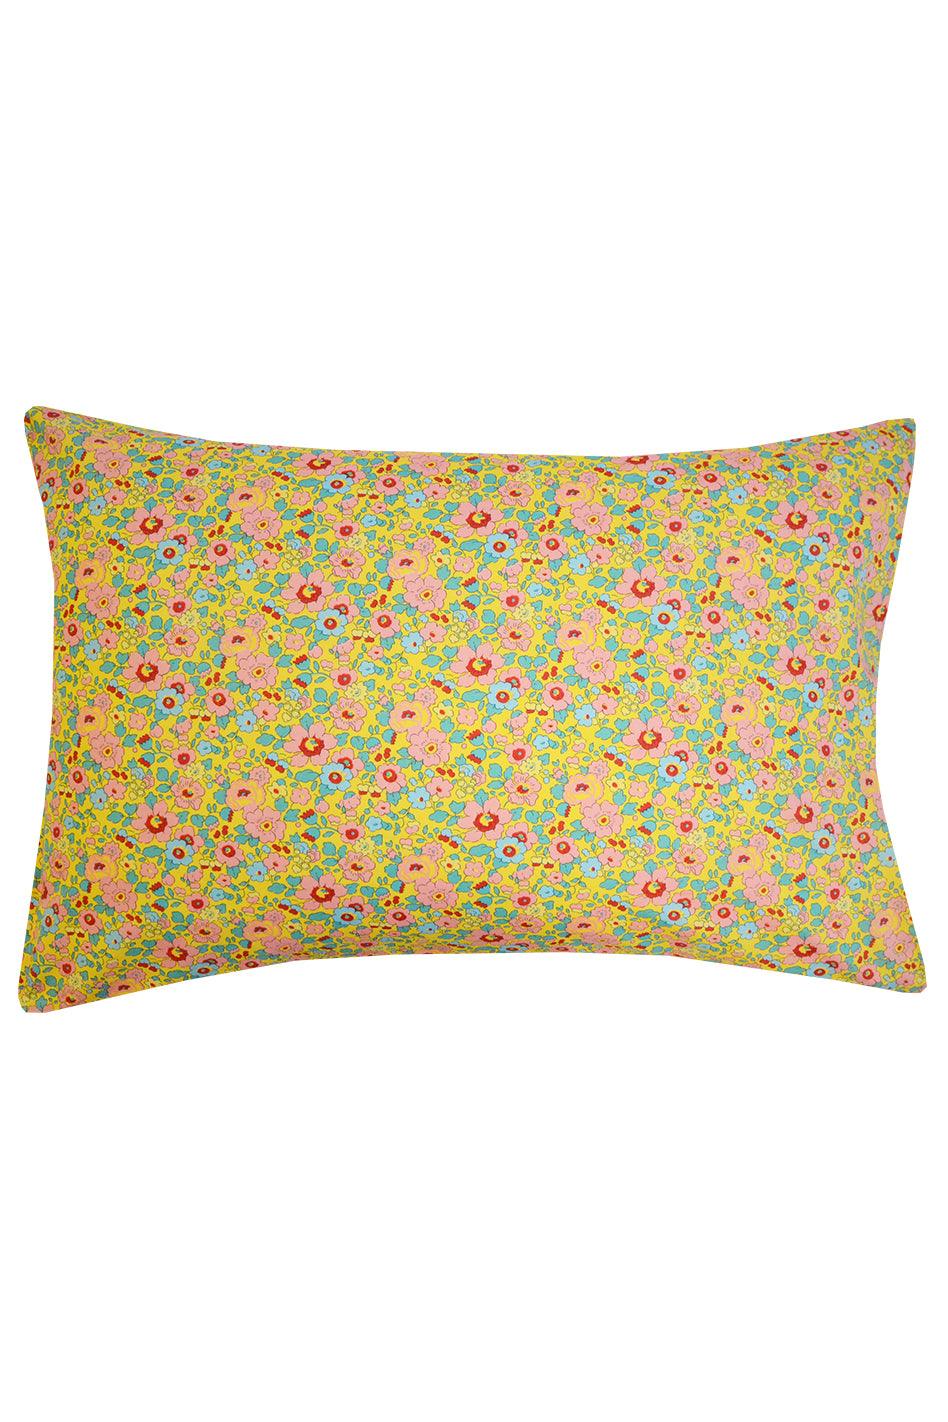 Pillowcase made with Liberty Fabric BETSY SUNFLOWER - Coco & Wolf